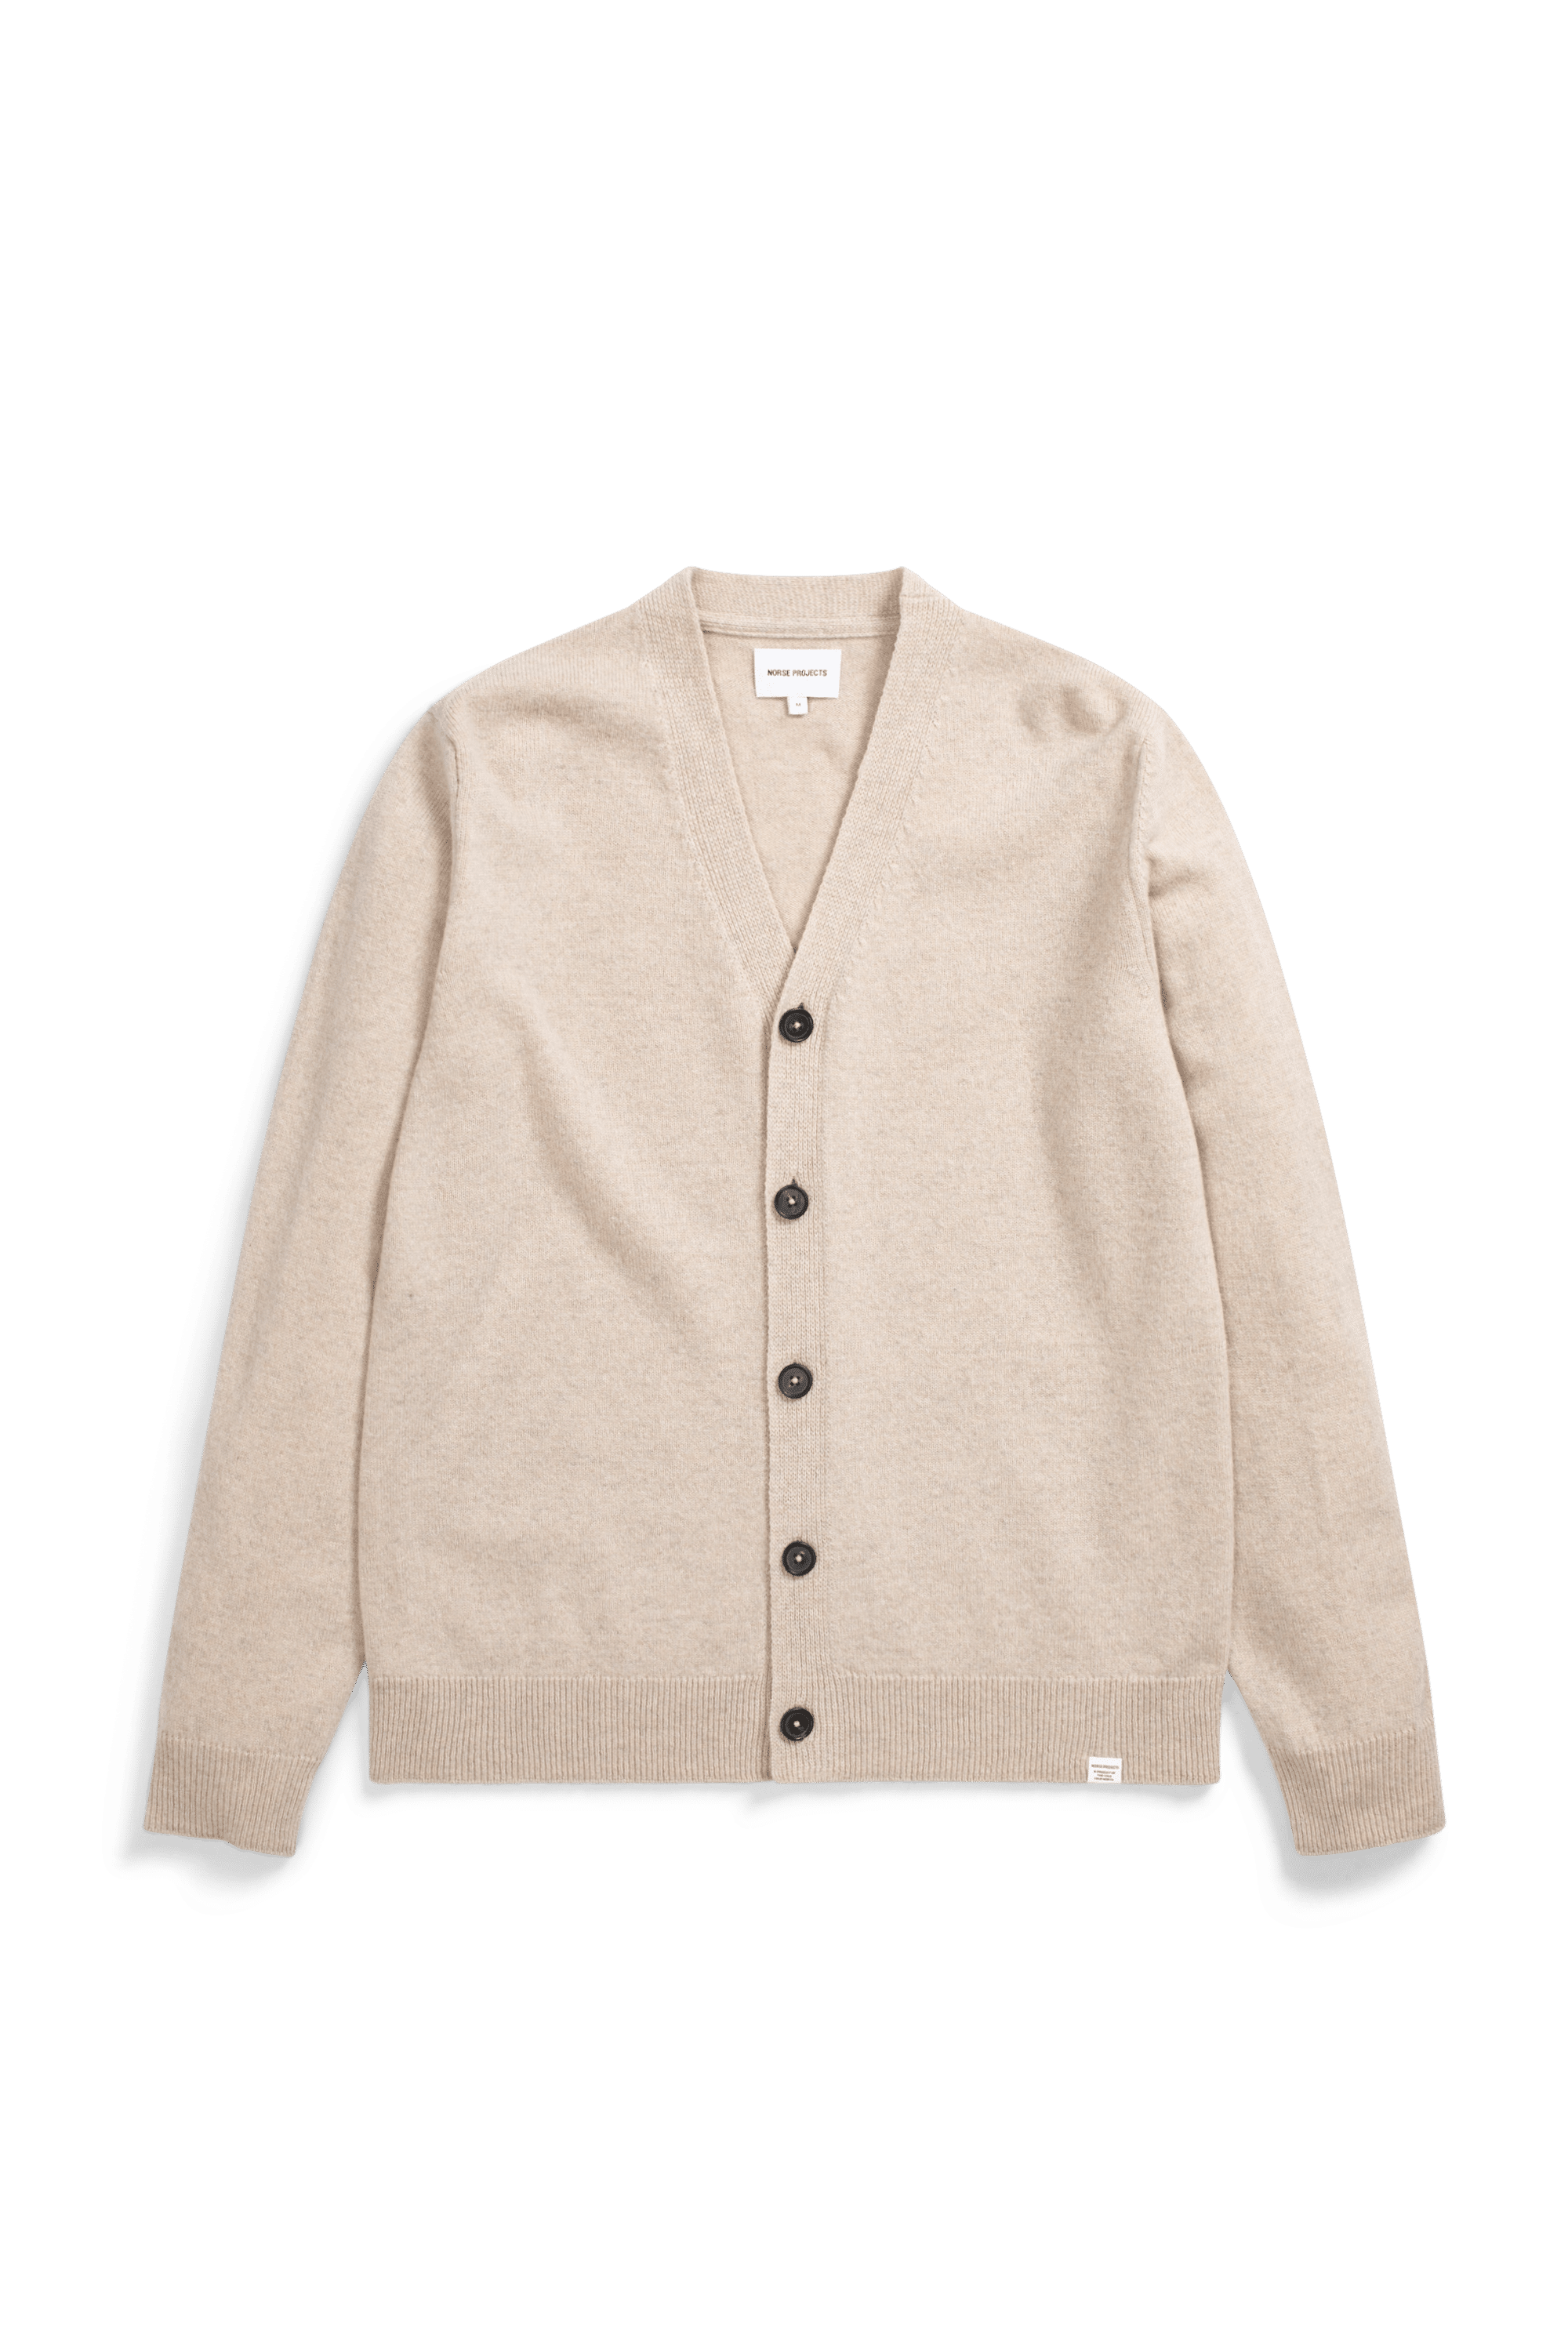 NORSE PROJECTS Adam Lambswool Cardigan - Oatmeal